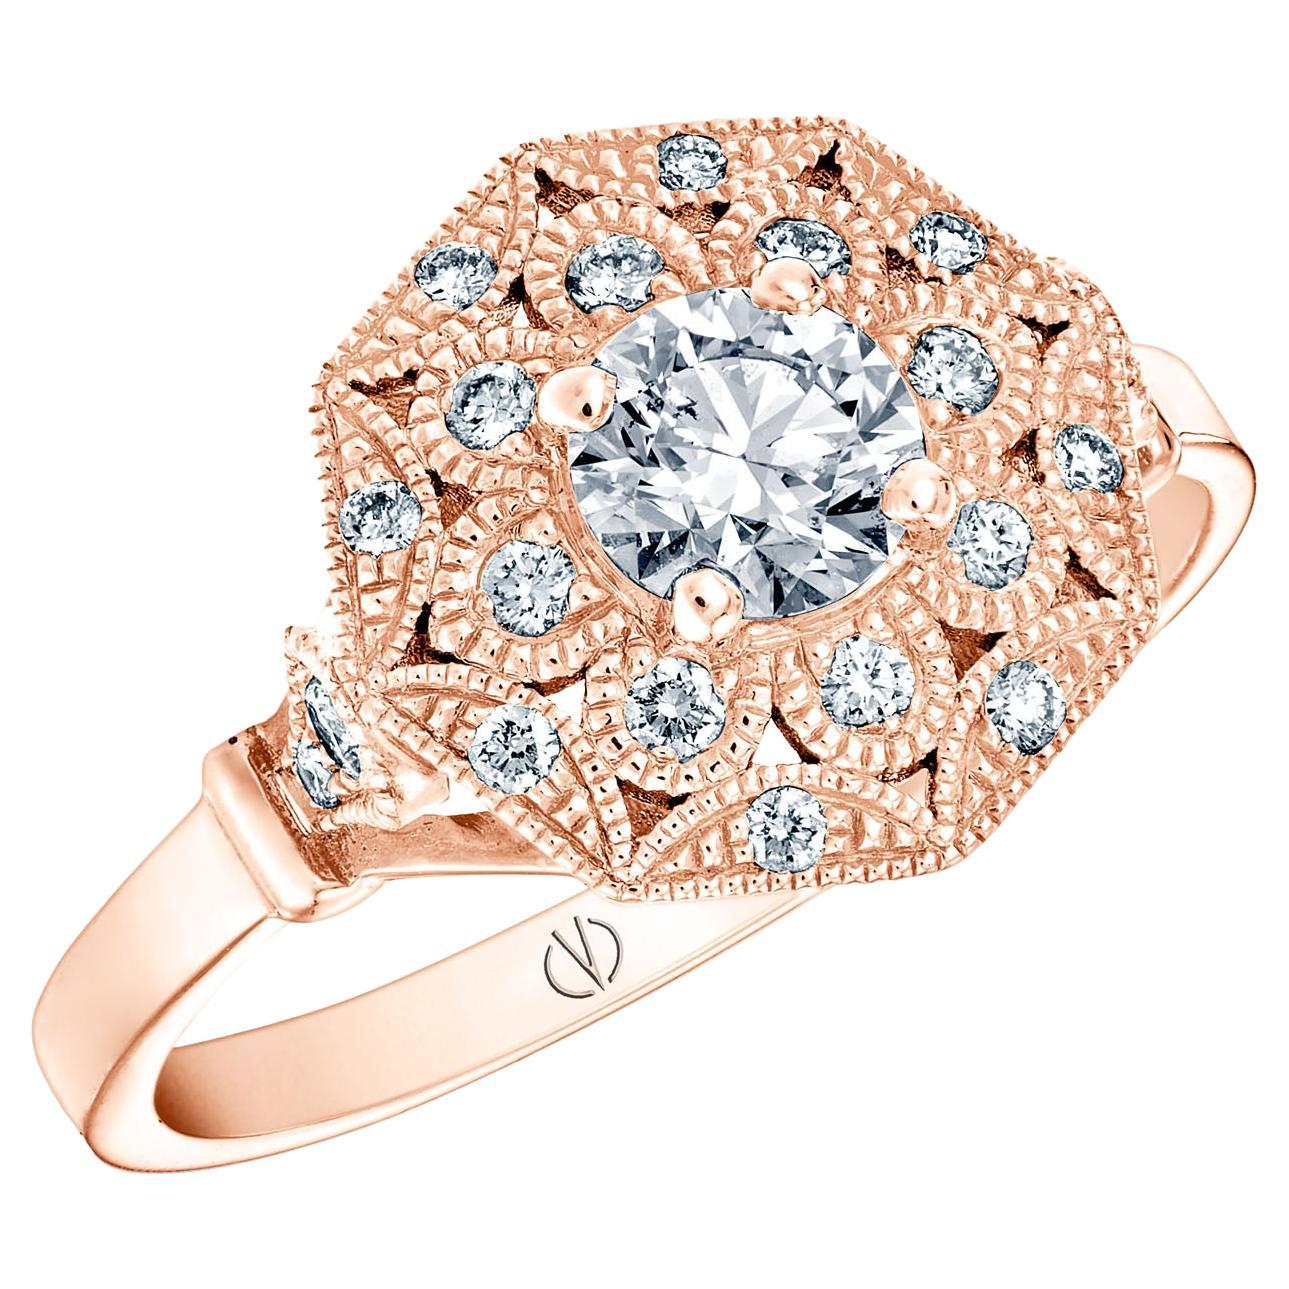 For Sale:  18k Rose Gold 0.40 Ct GIA Certified Diamond Ring set with 0.16 Cts of Diamonds